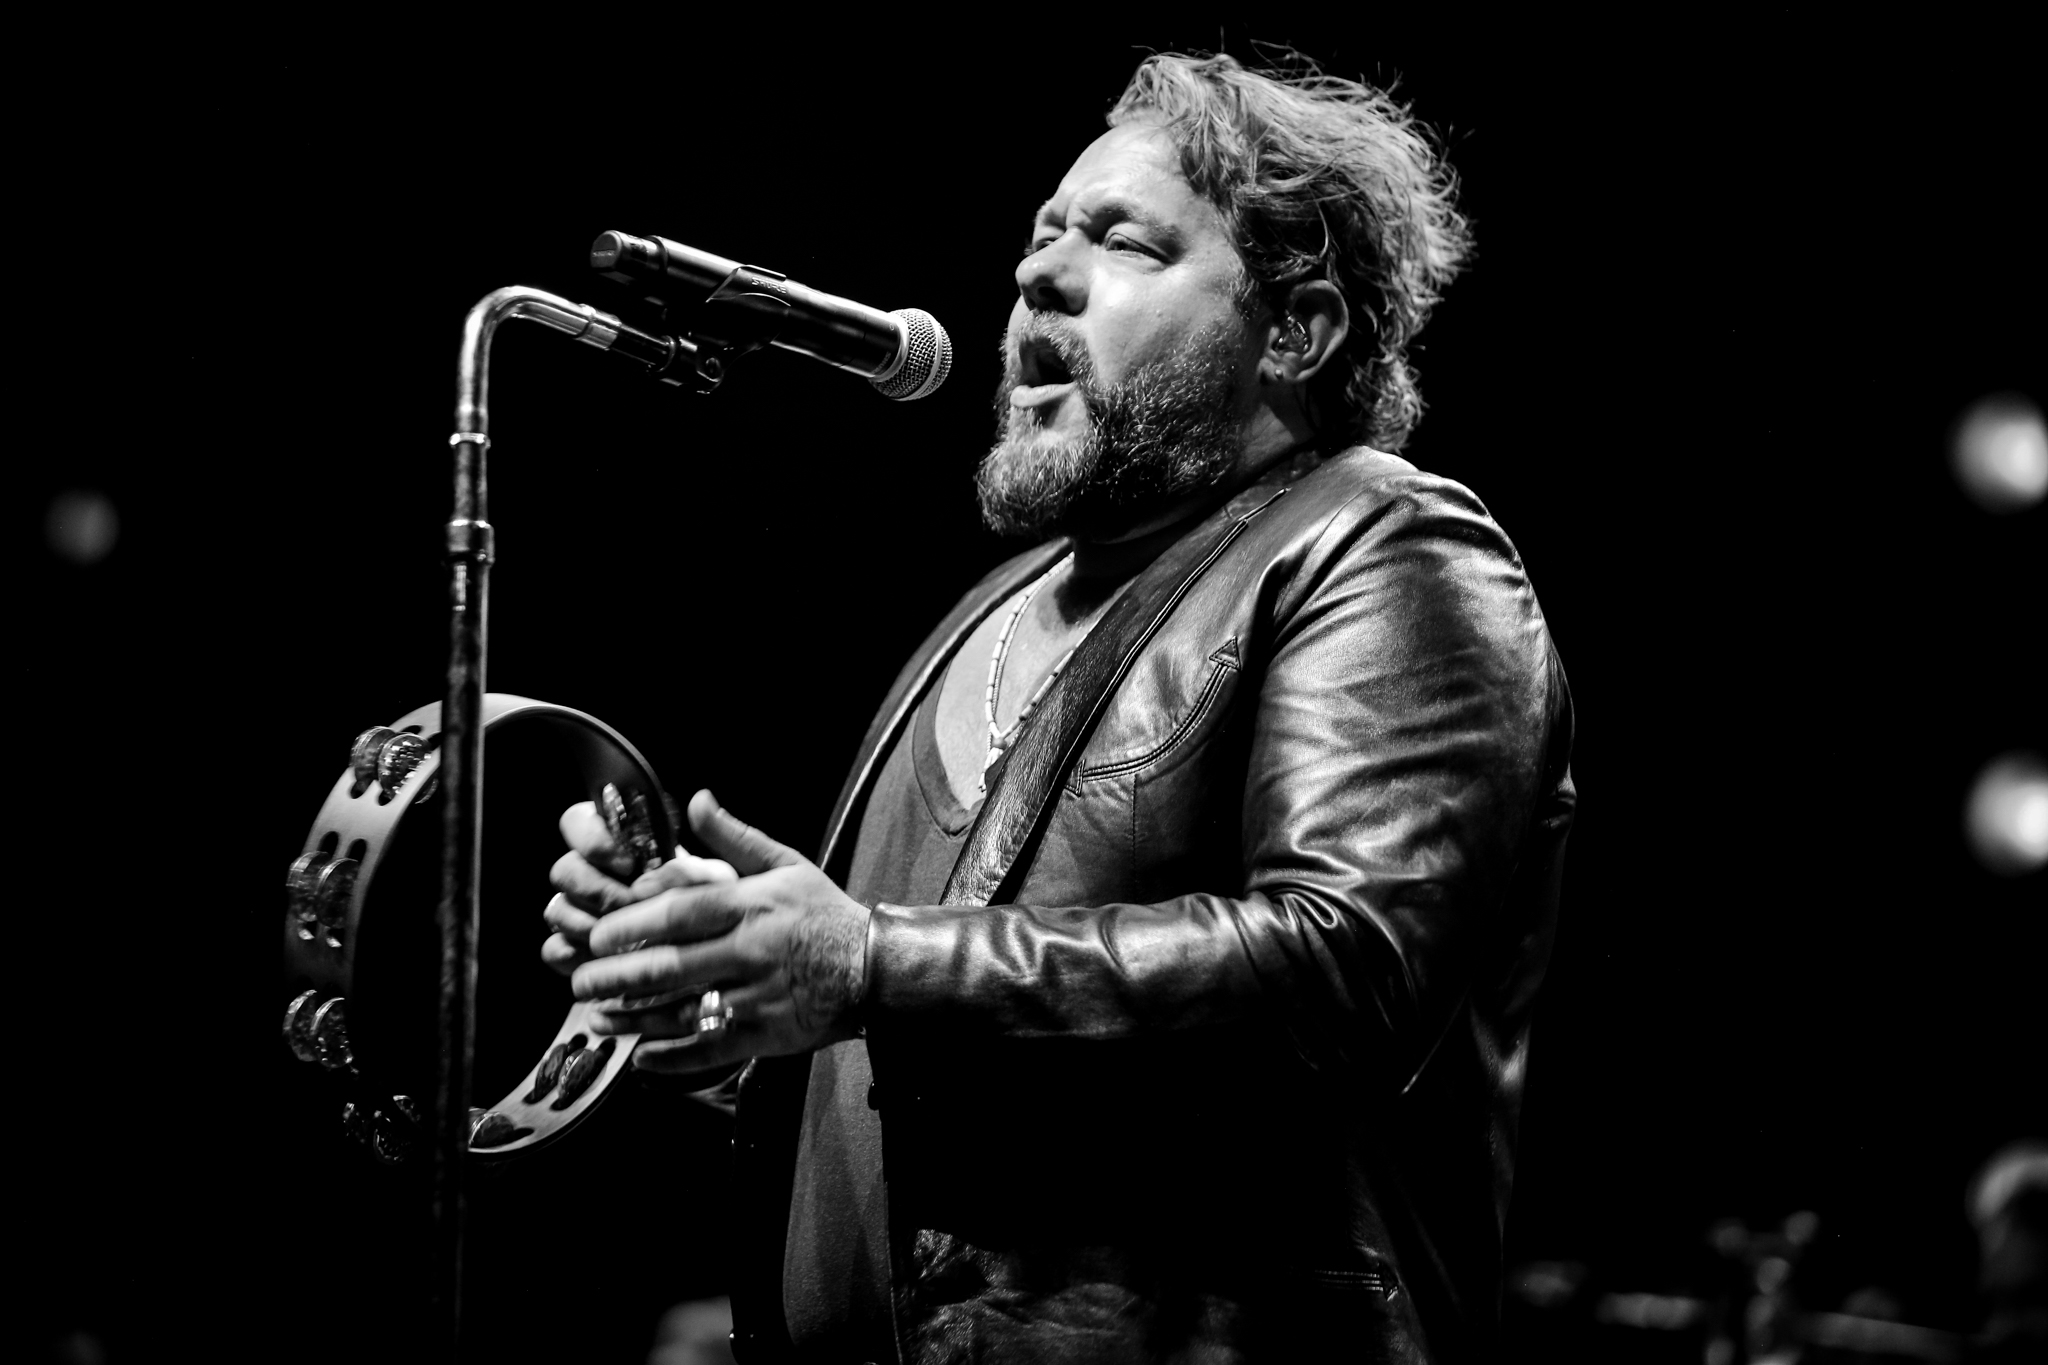 Nathaniel Rateliff performs in Asheville NC  with images by Light Shifter Studios.  